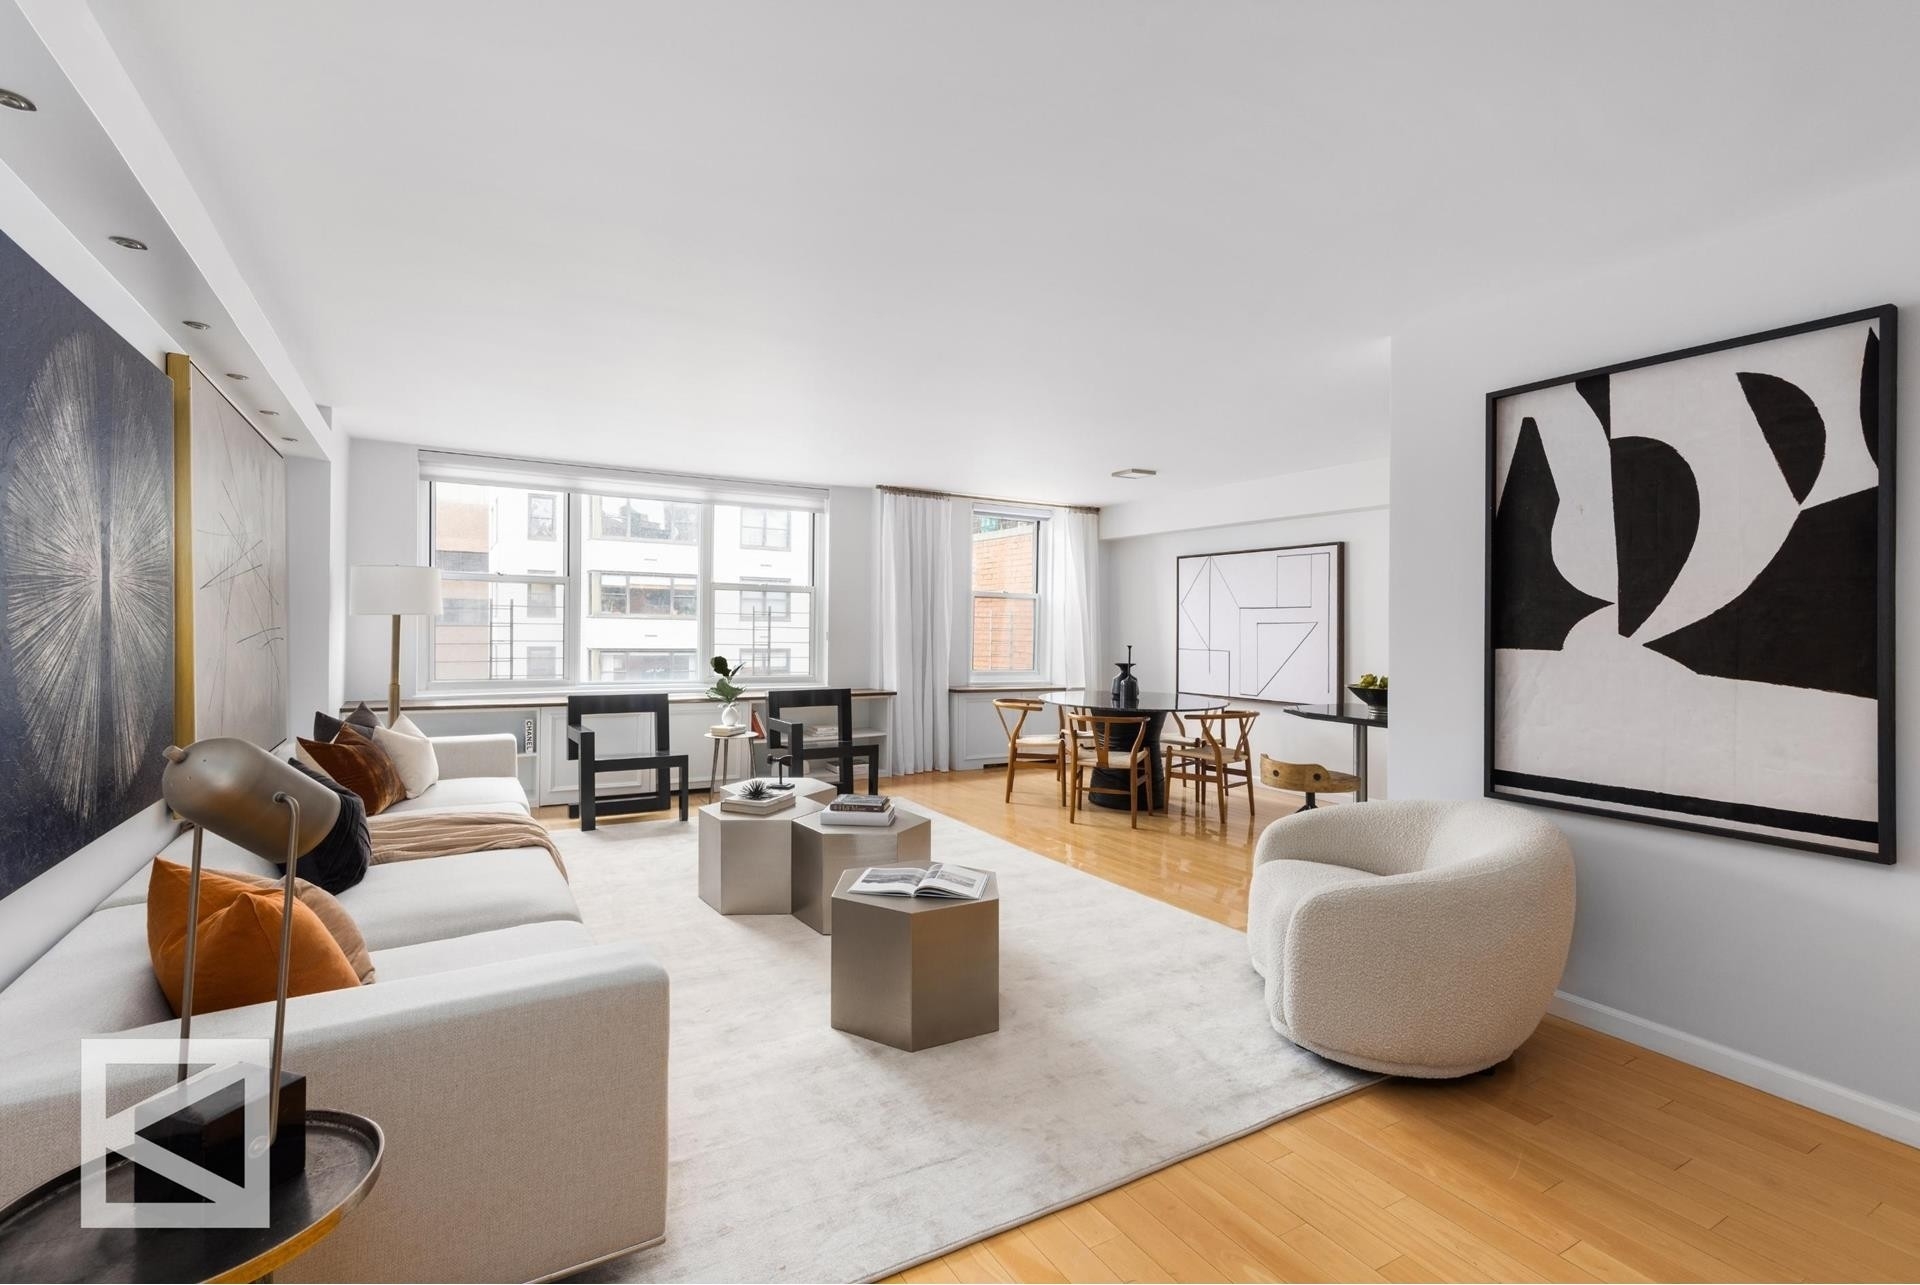 Co-op Properties for Sale at 207 E 74TH ST, 8M Lenox Hill, New York, New York 10021